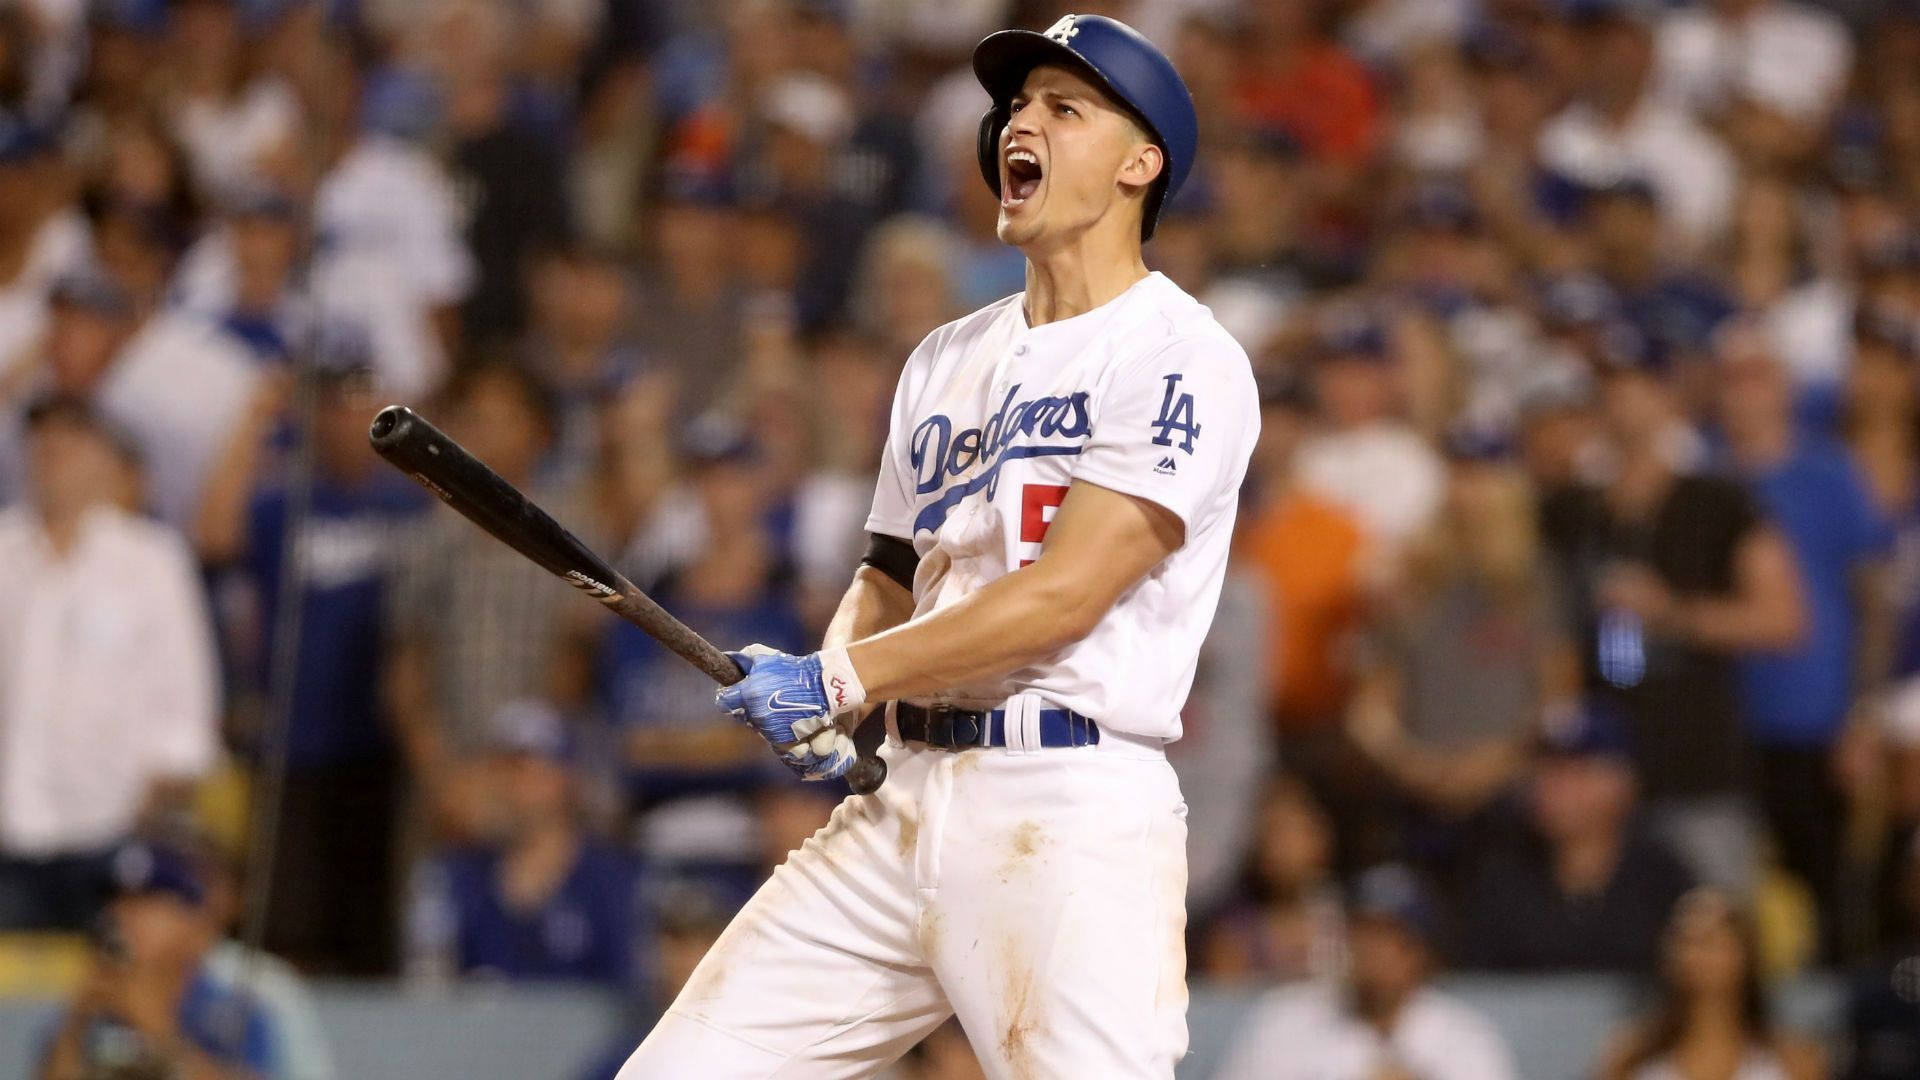 Corey Seager Cheering While Holding A Bat Background